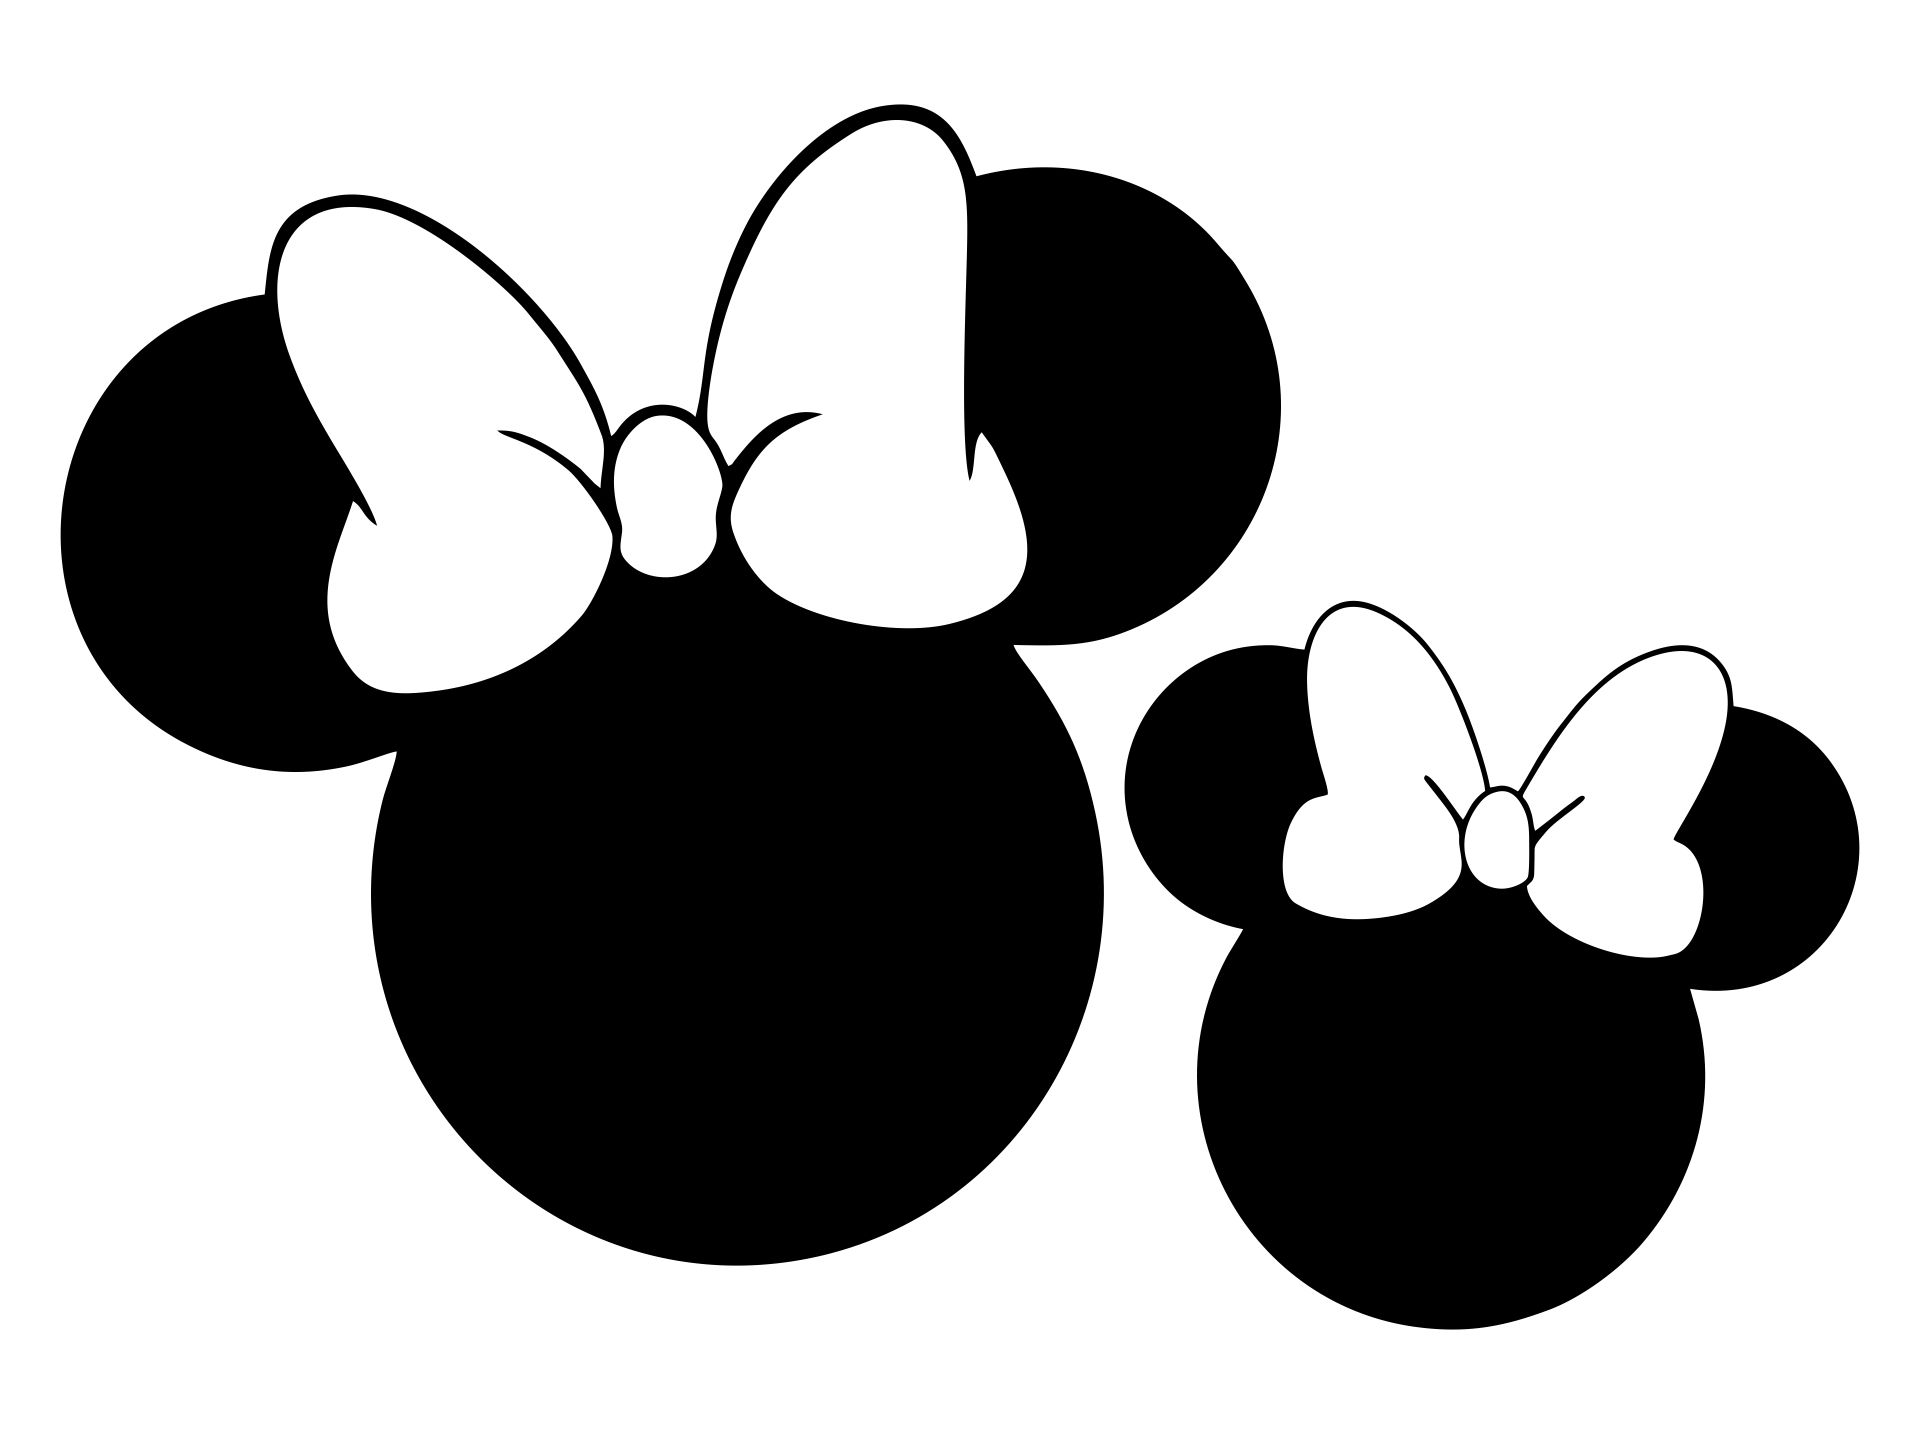 Minnie Mouse Silhouette Template from www.printablee.com